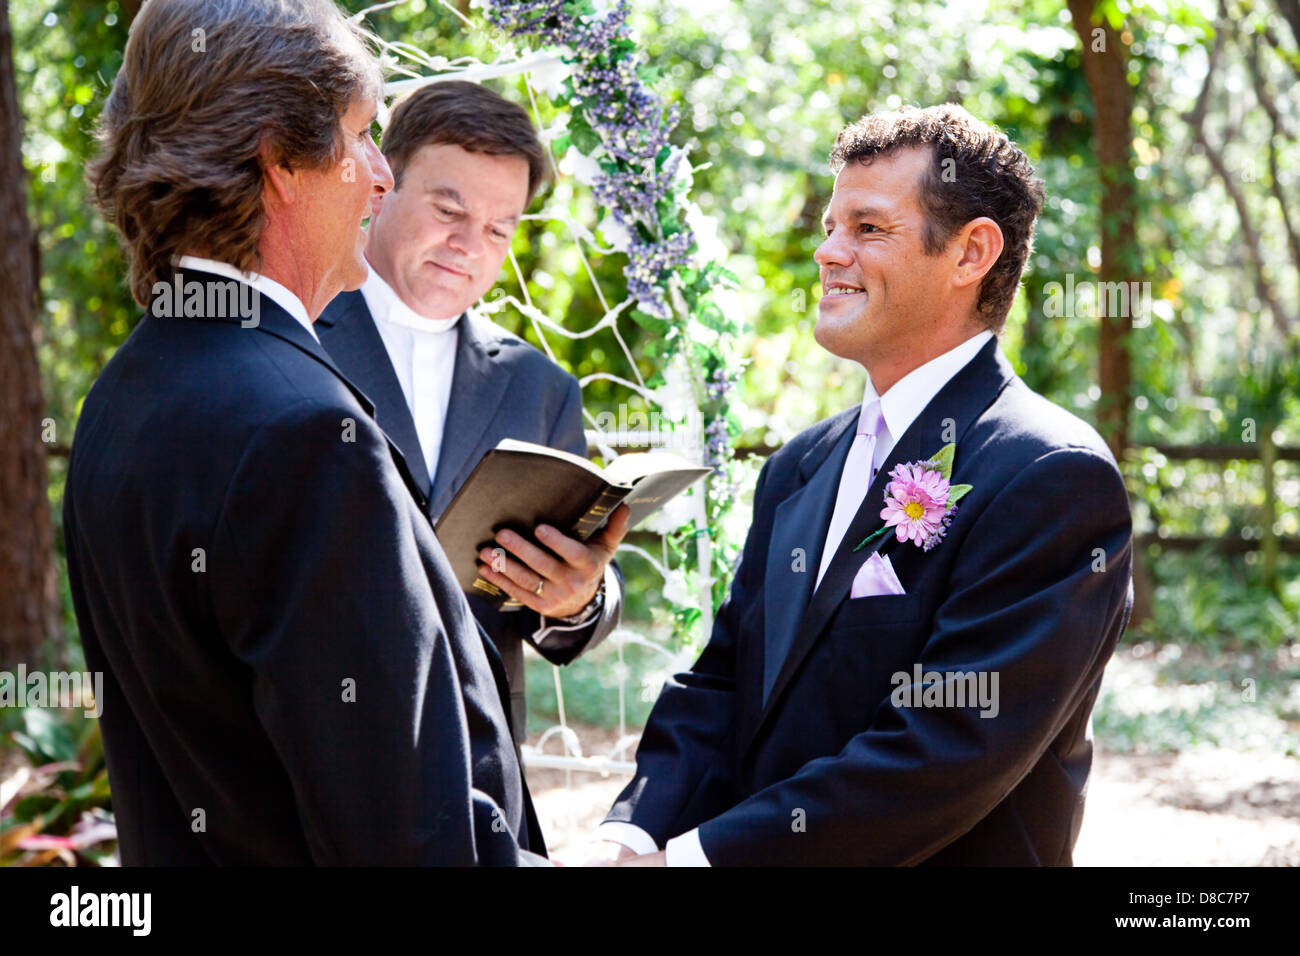 Handsome gay couple getting married in beautiful outdoor ceremony.  Stock Photo